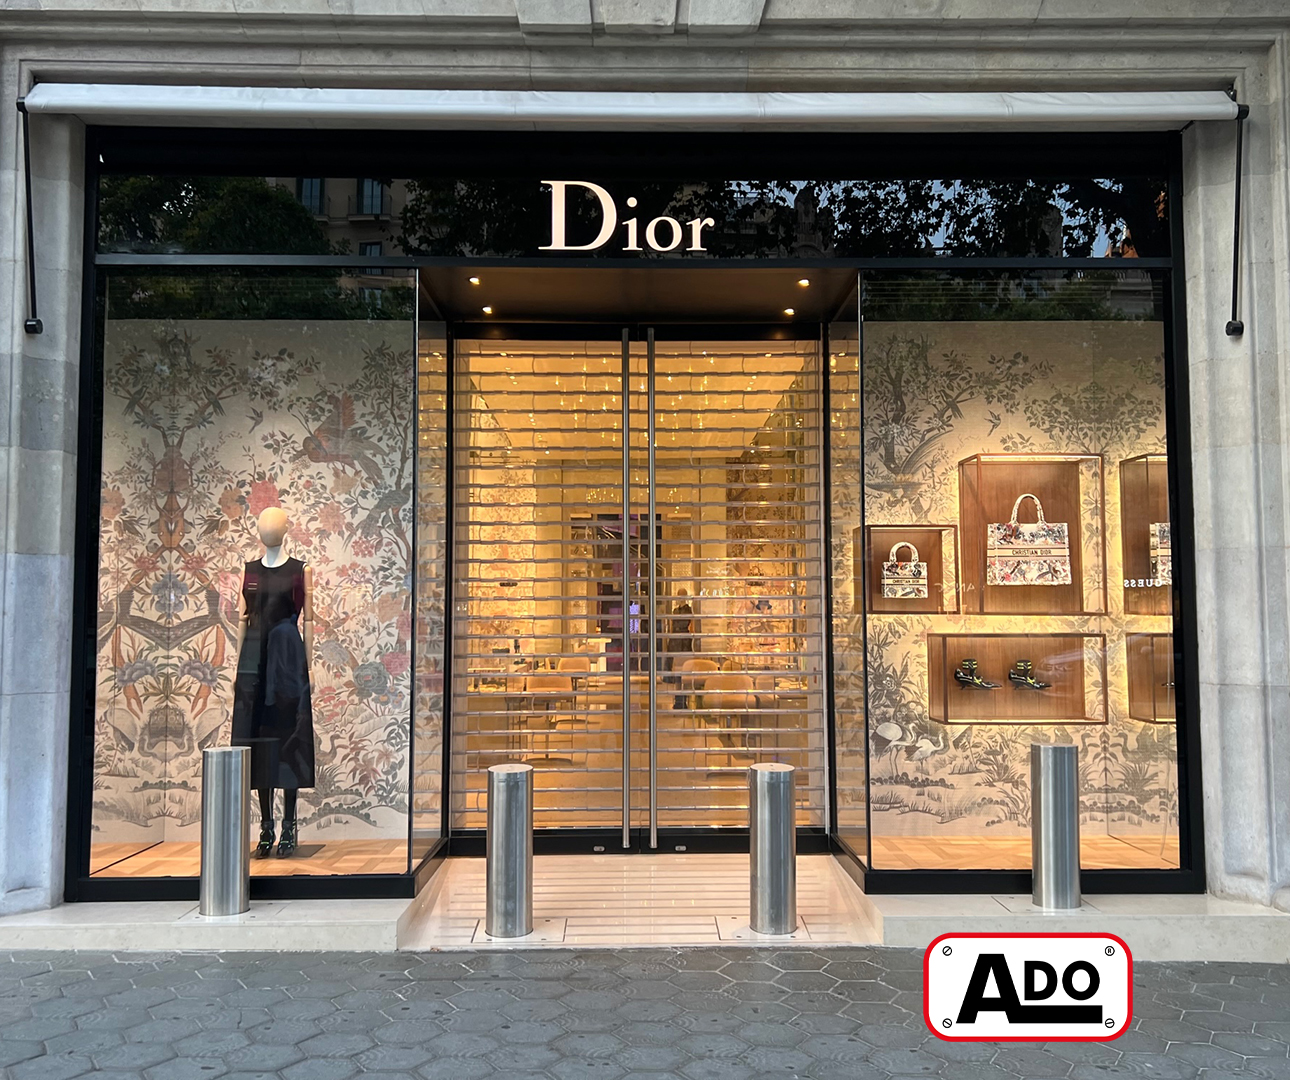 Security bollards installed in Dior Barcelona luxury store